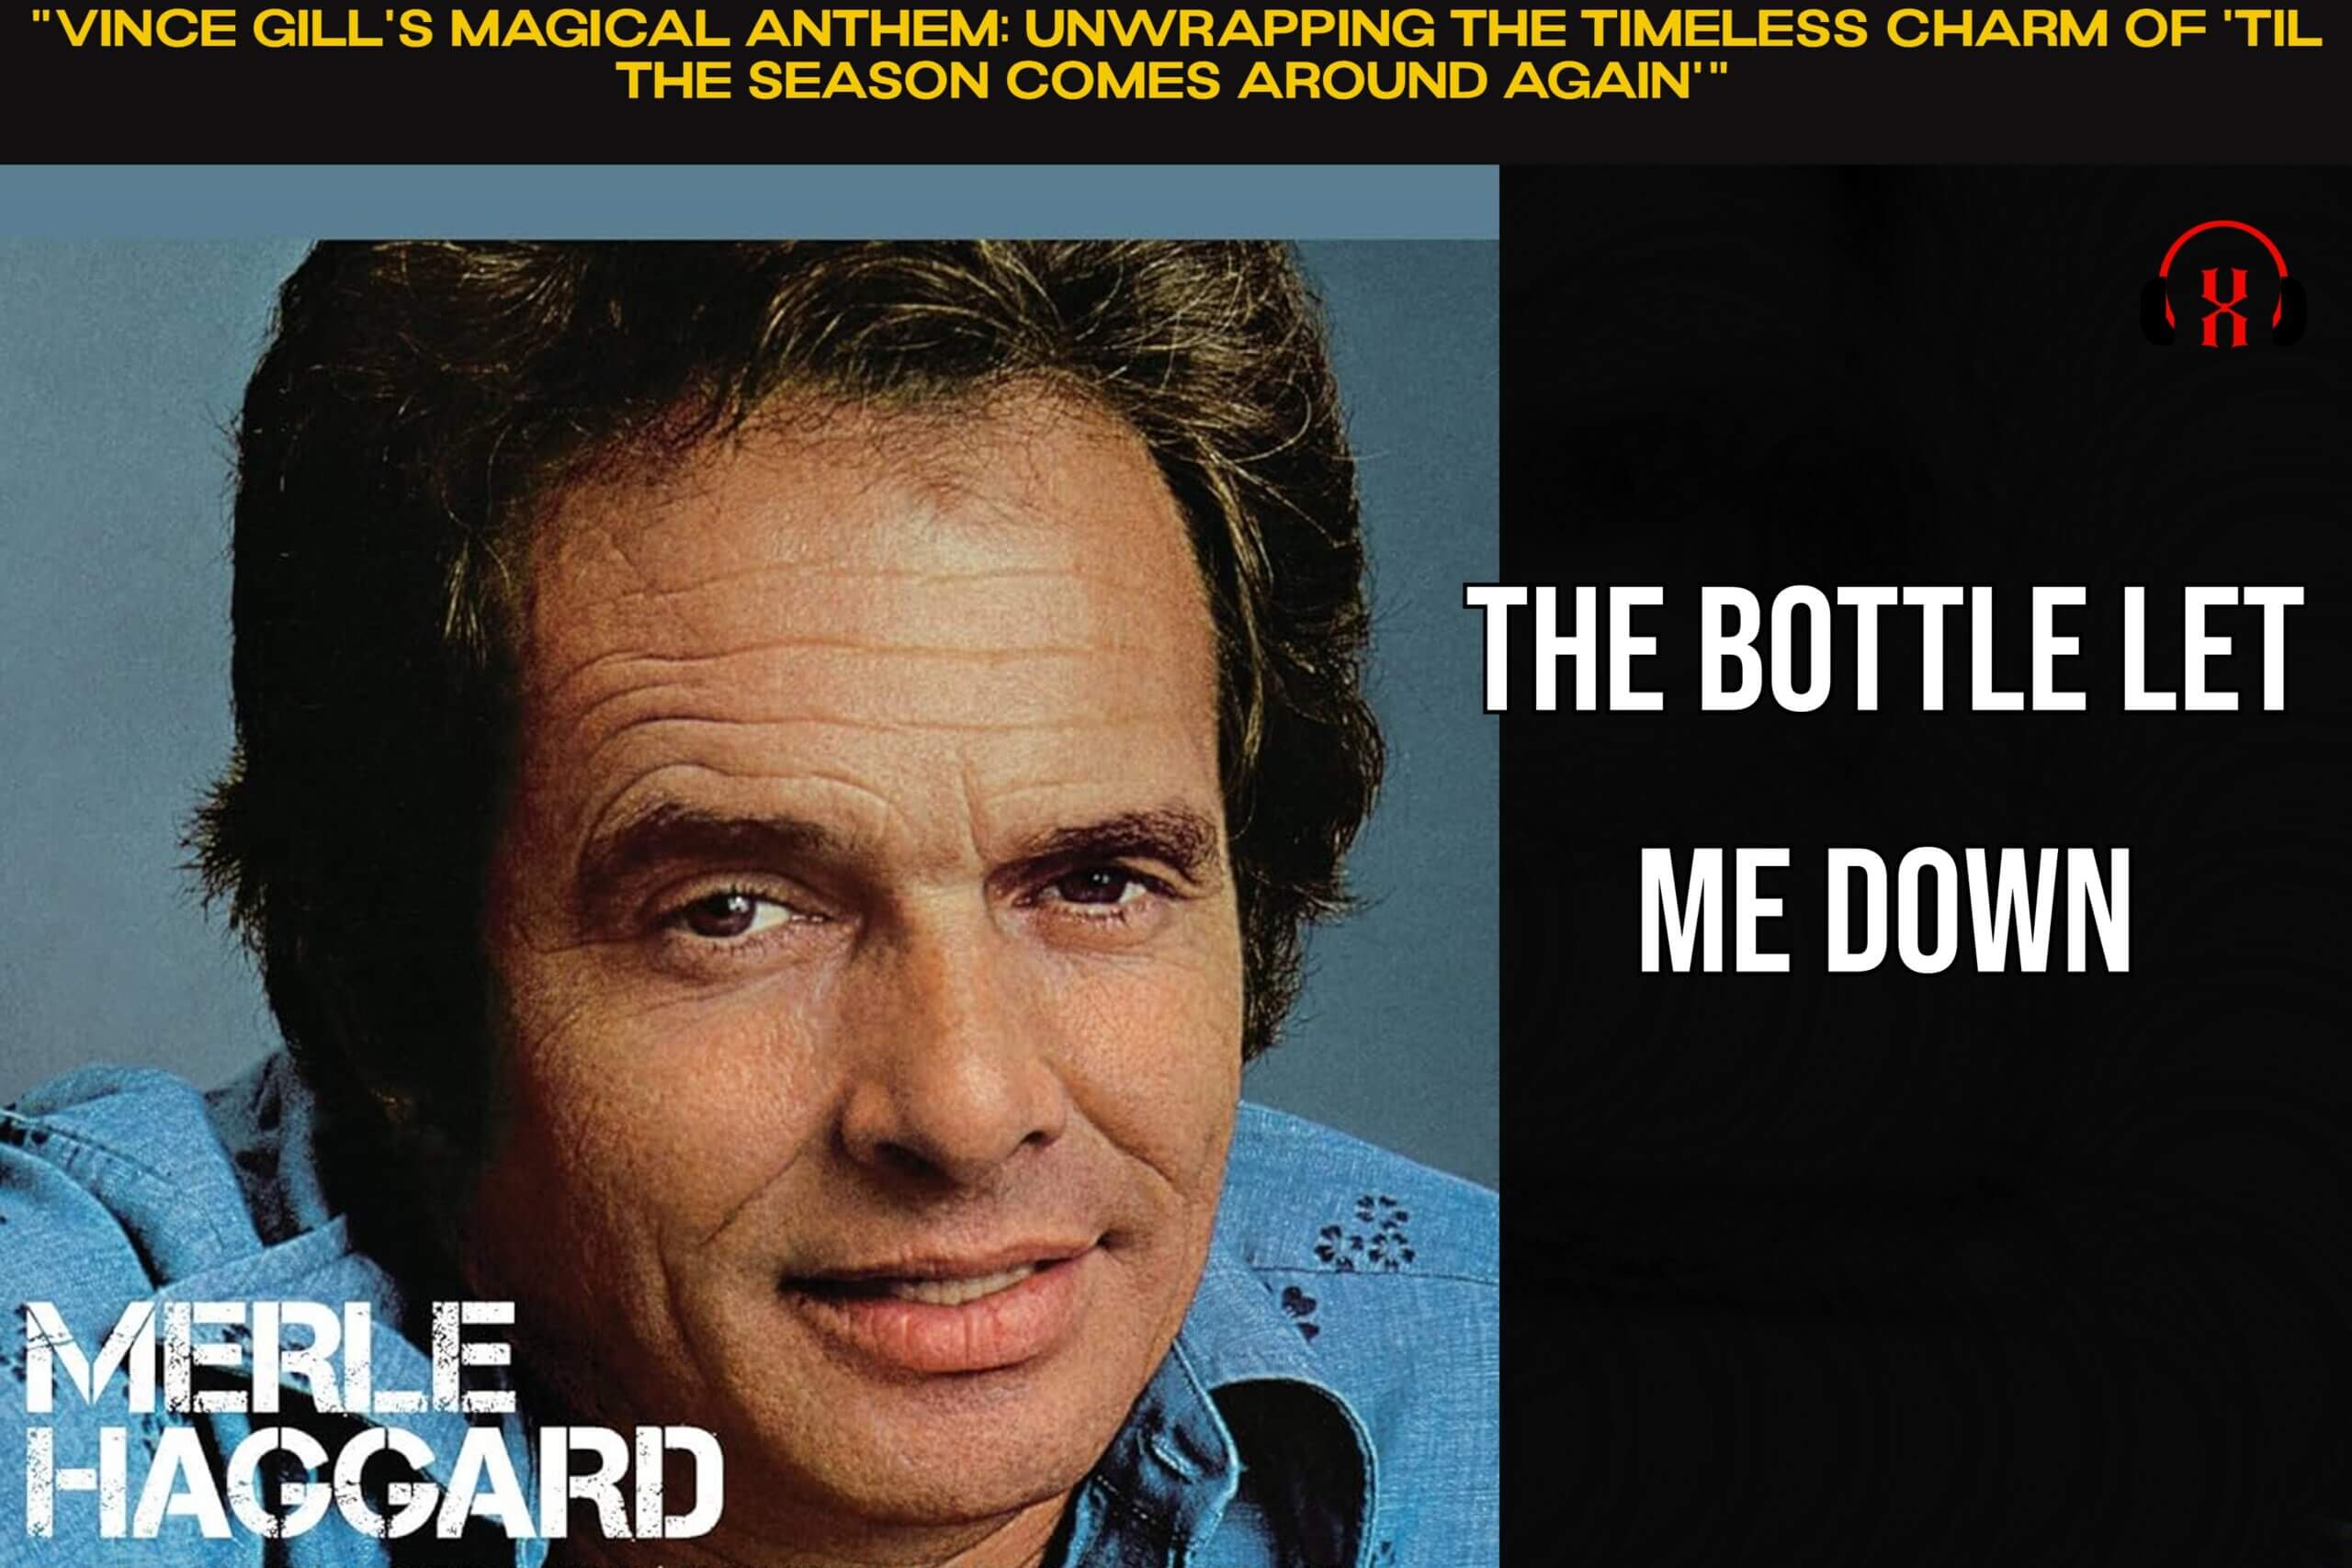 “Merle Haggard’s “The Bottle Let Me Down”: A Timeless Symphony of Heartbreak and Healing That Resonates Across Generations”